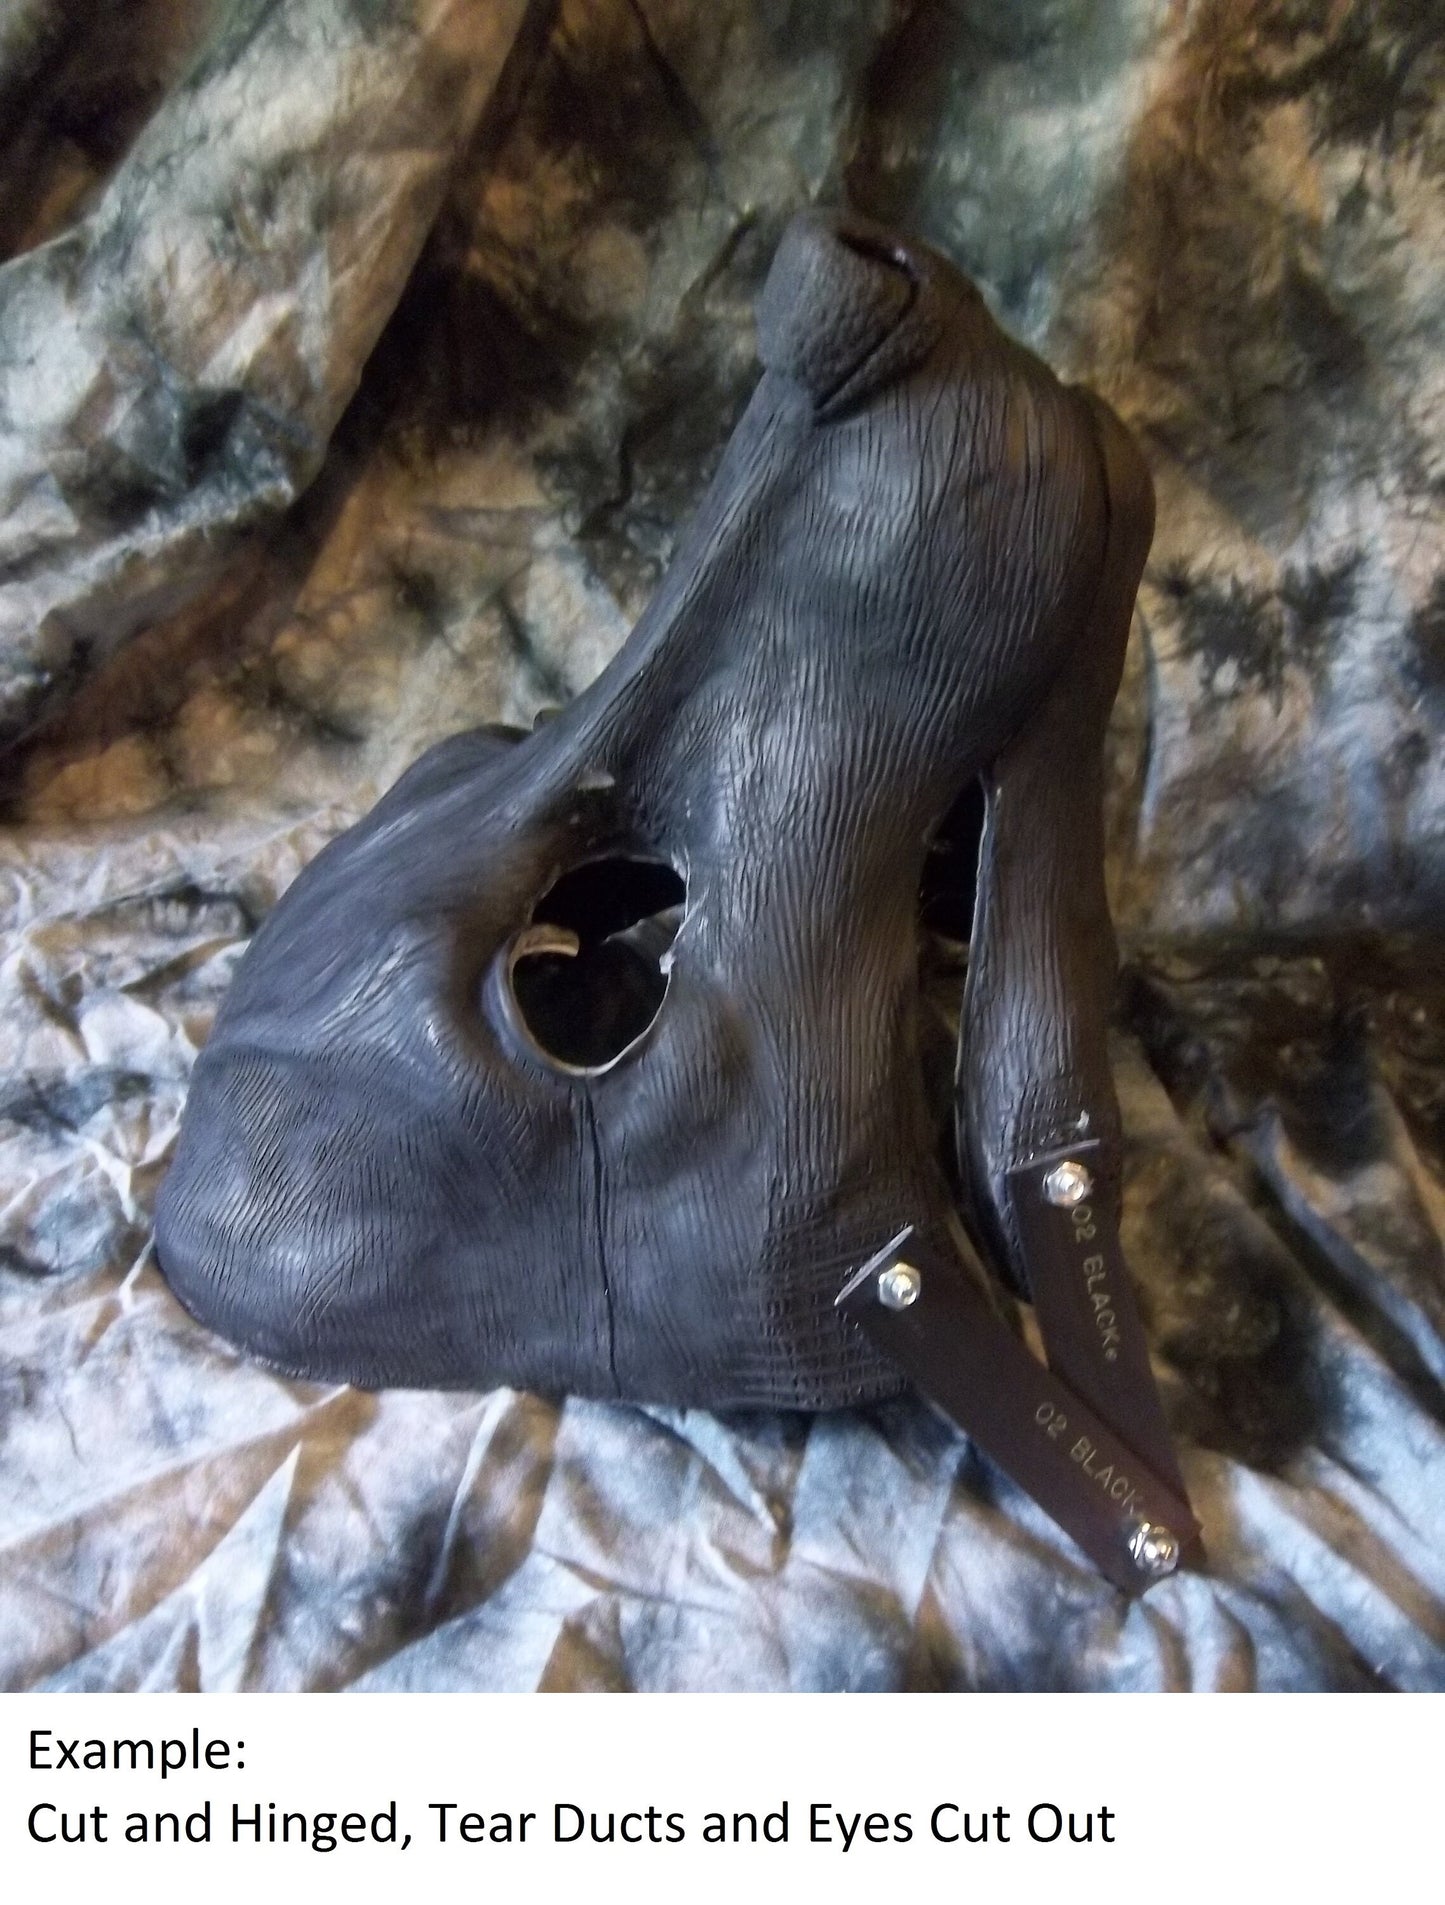 Realistic Canine Resin Mask MOLD (not a base)